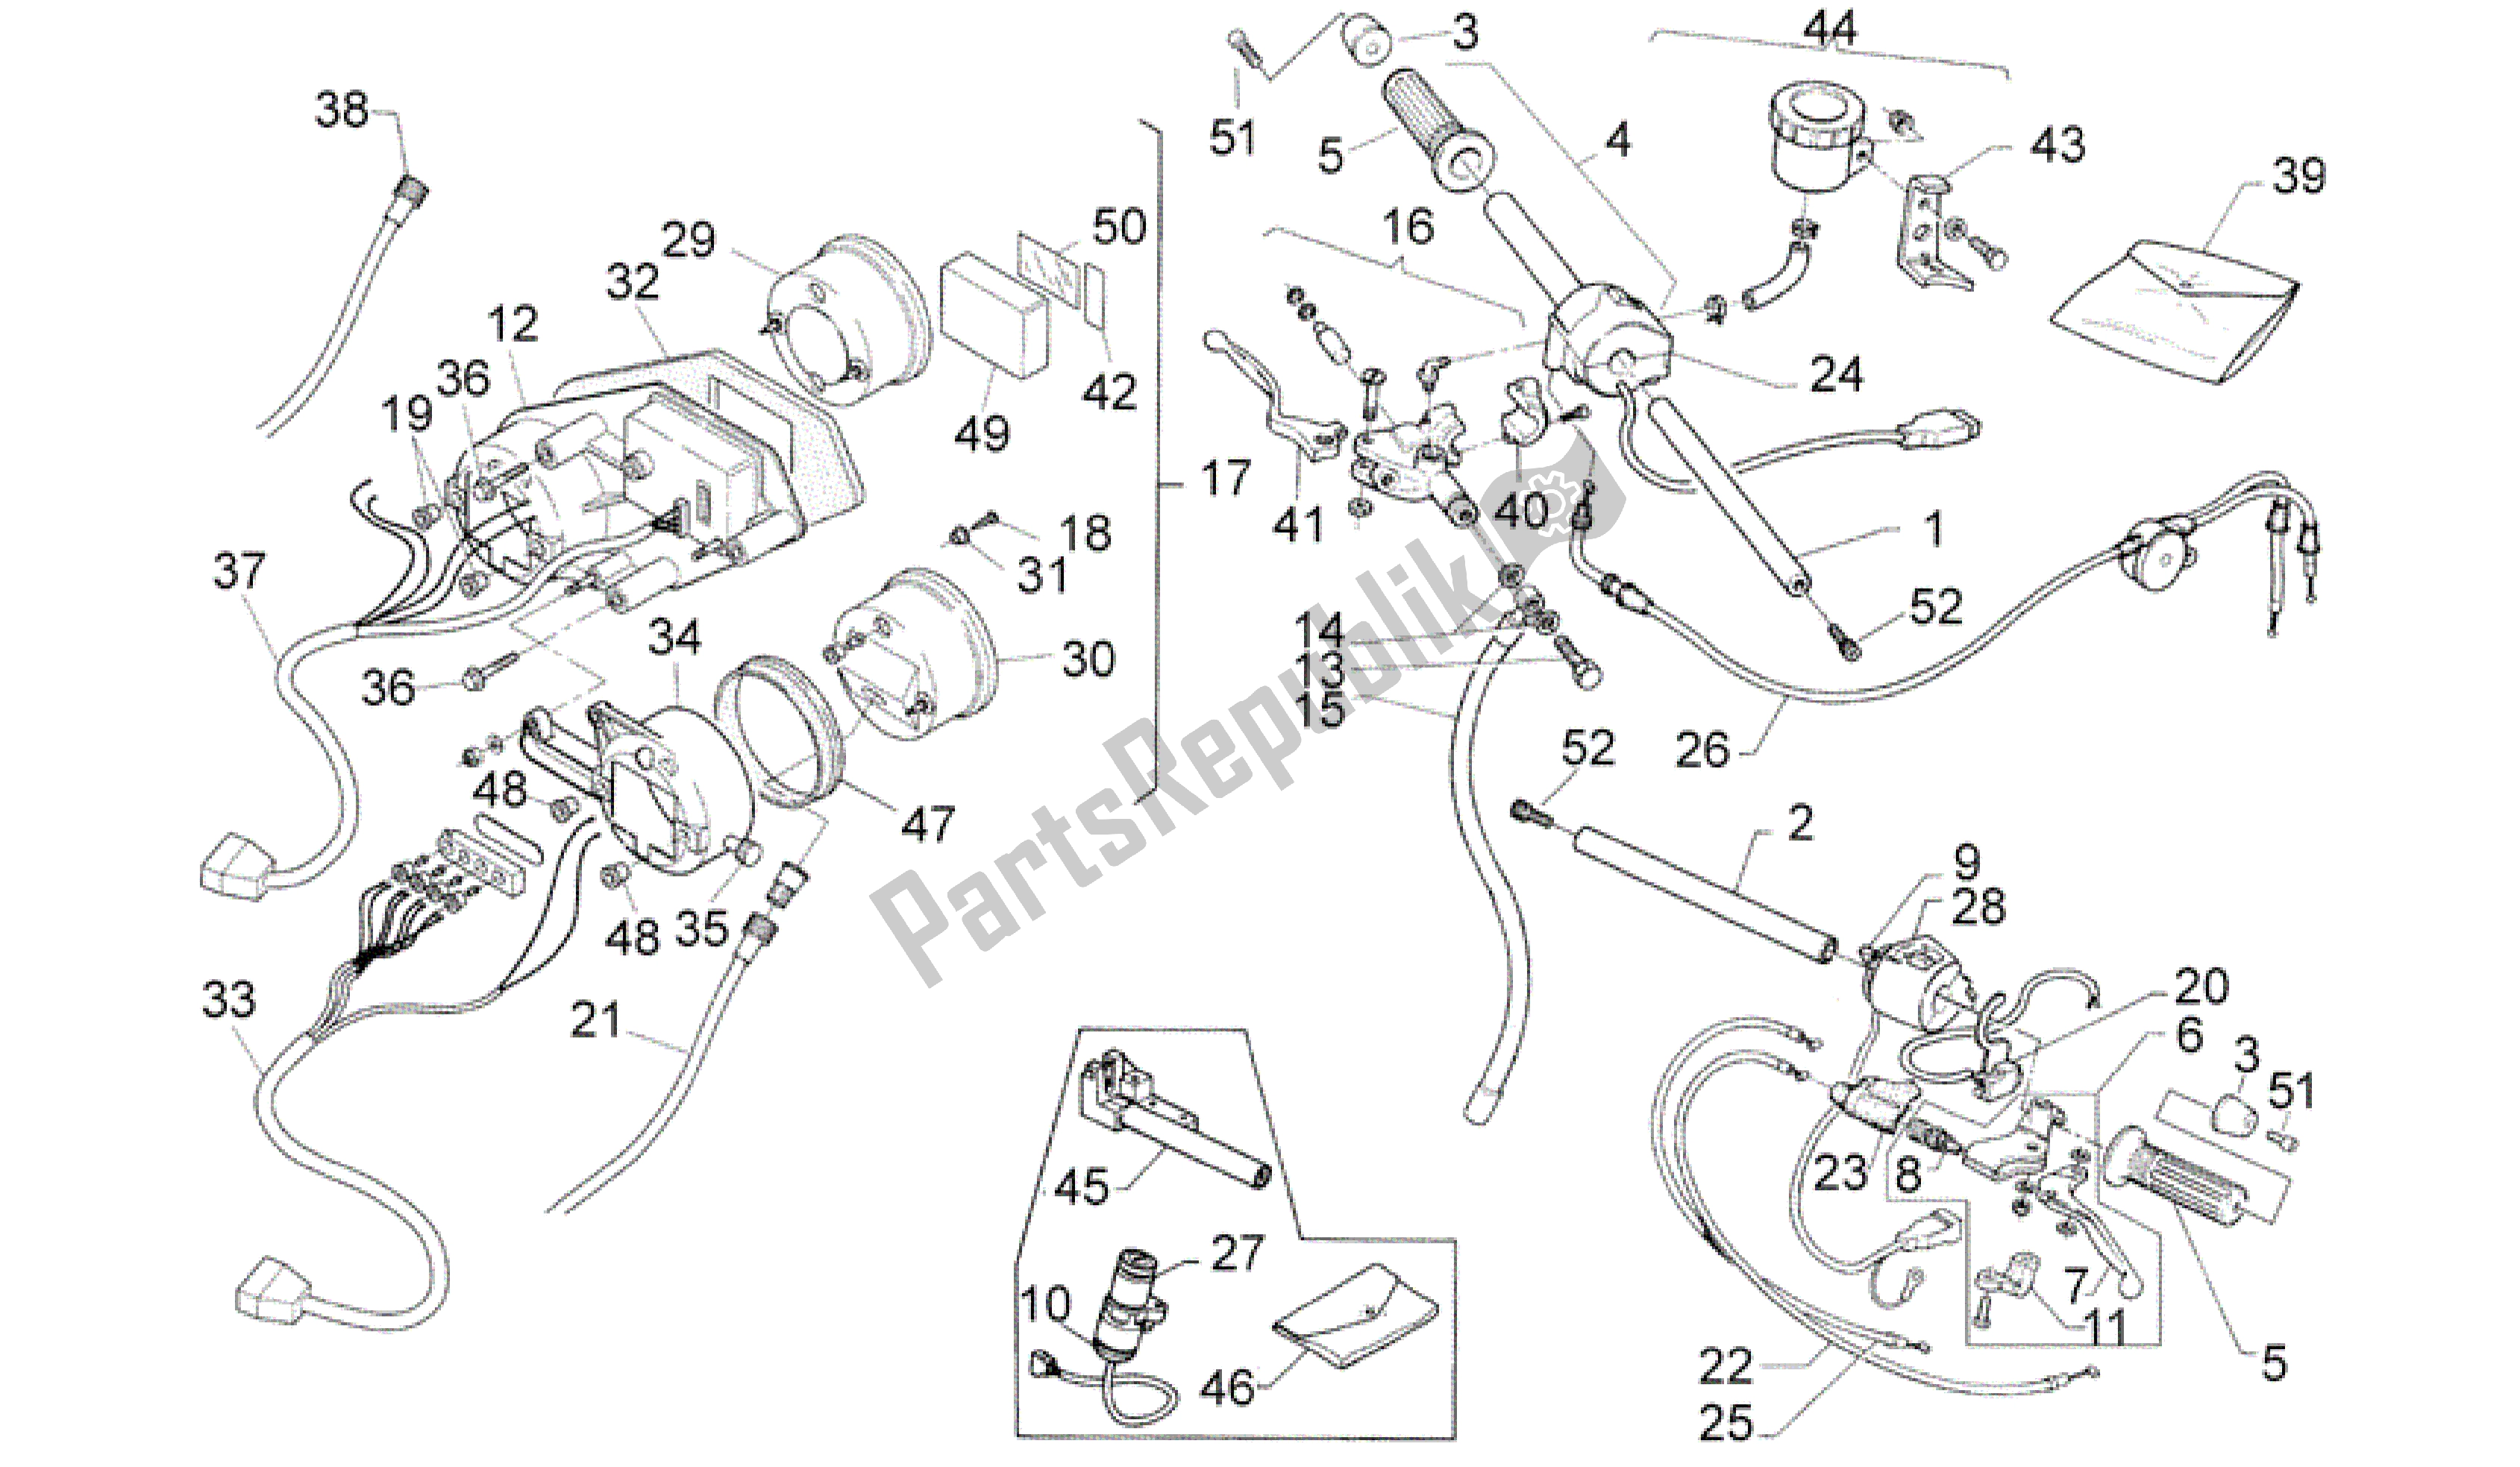 All parts for the Handlebar - Dashboard of the Aprilia Rotax 122 125 1996 - 1997